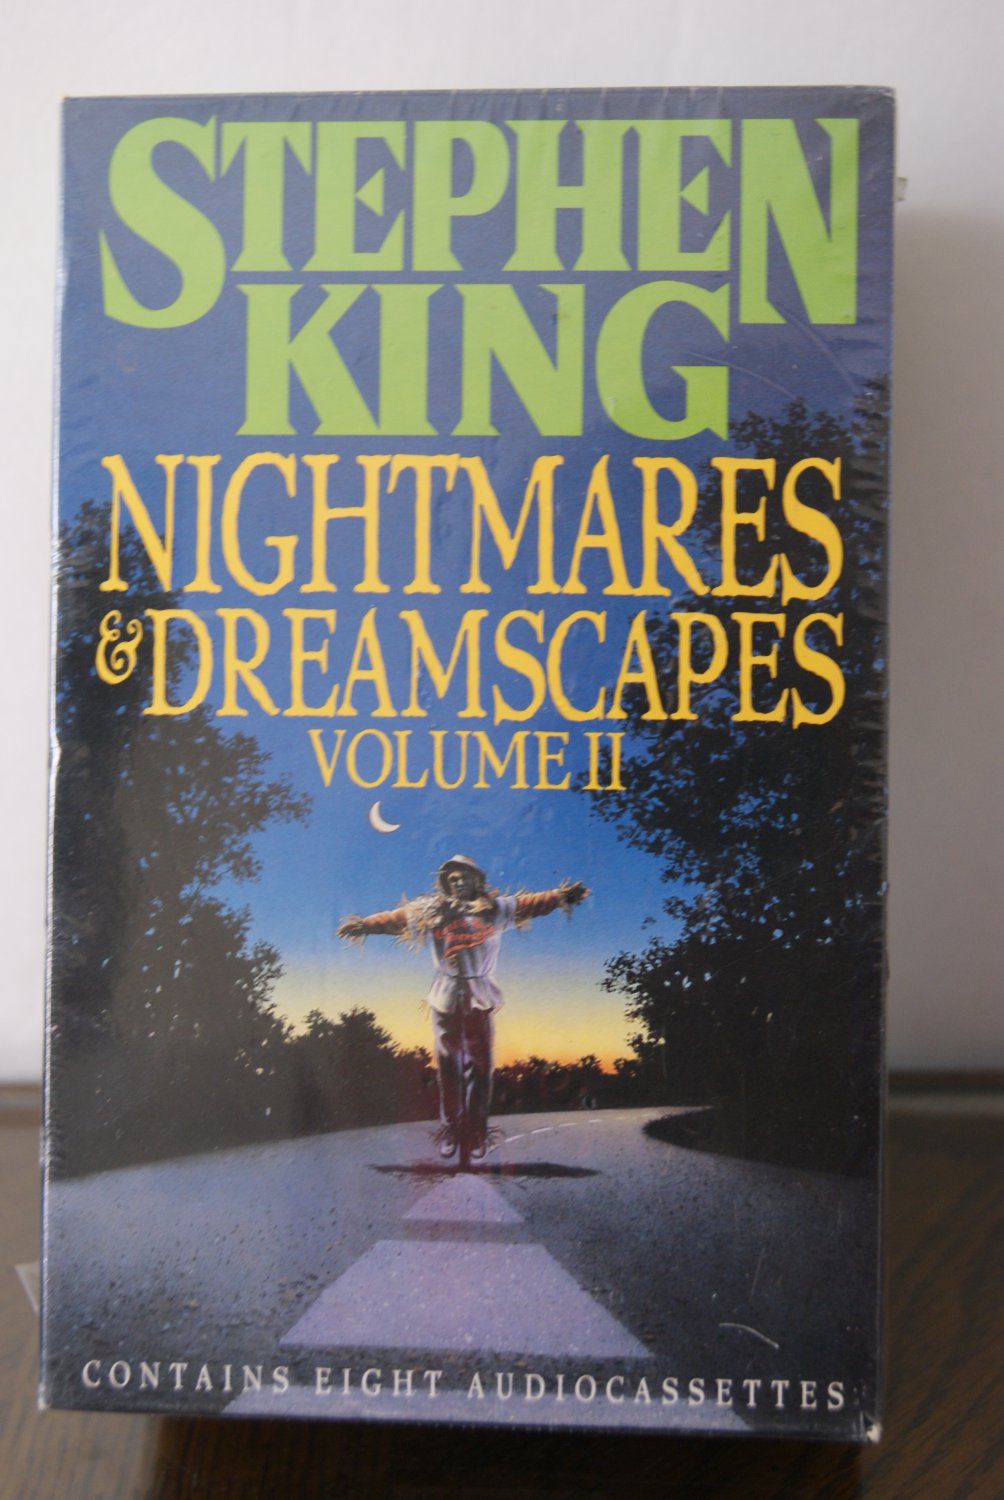 nightmares and dreamscapes